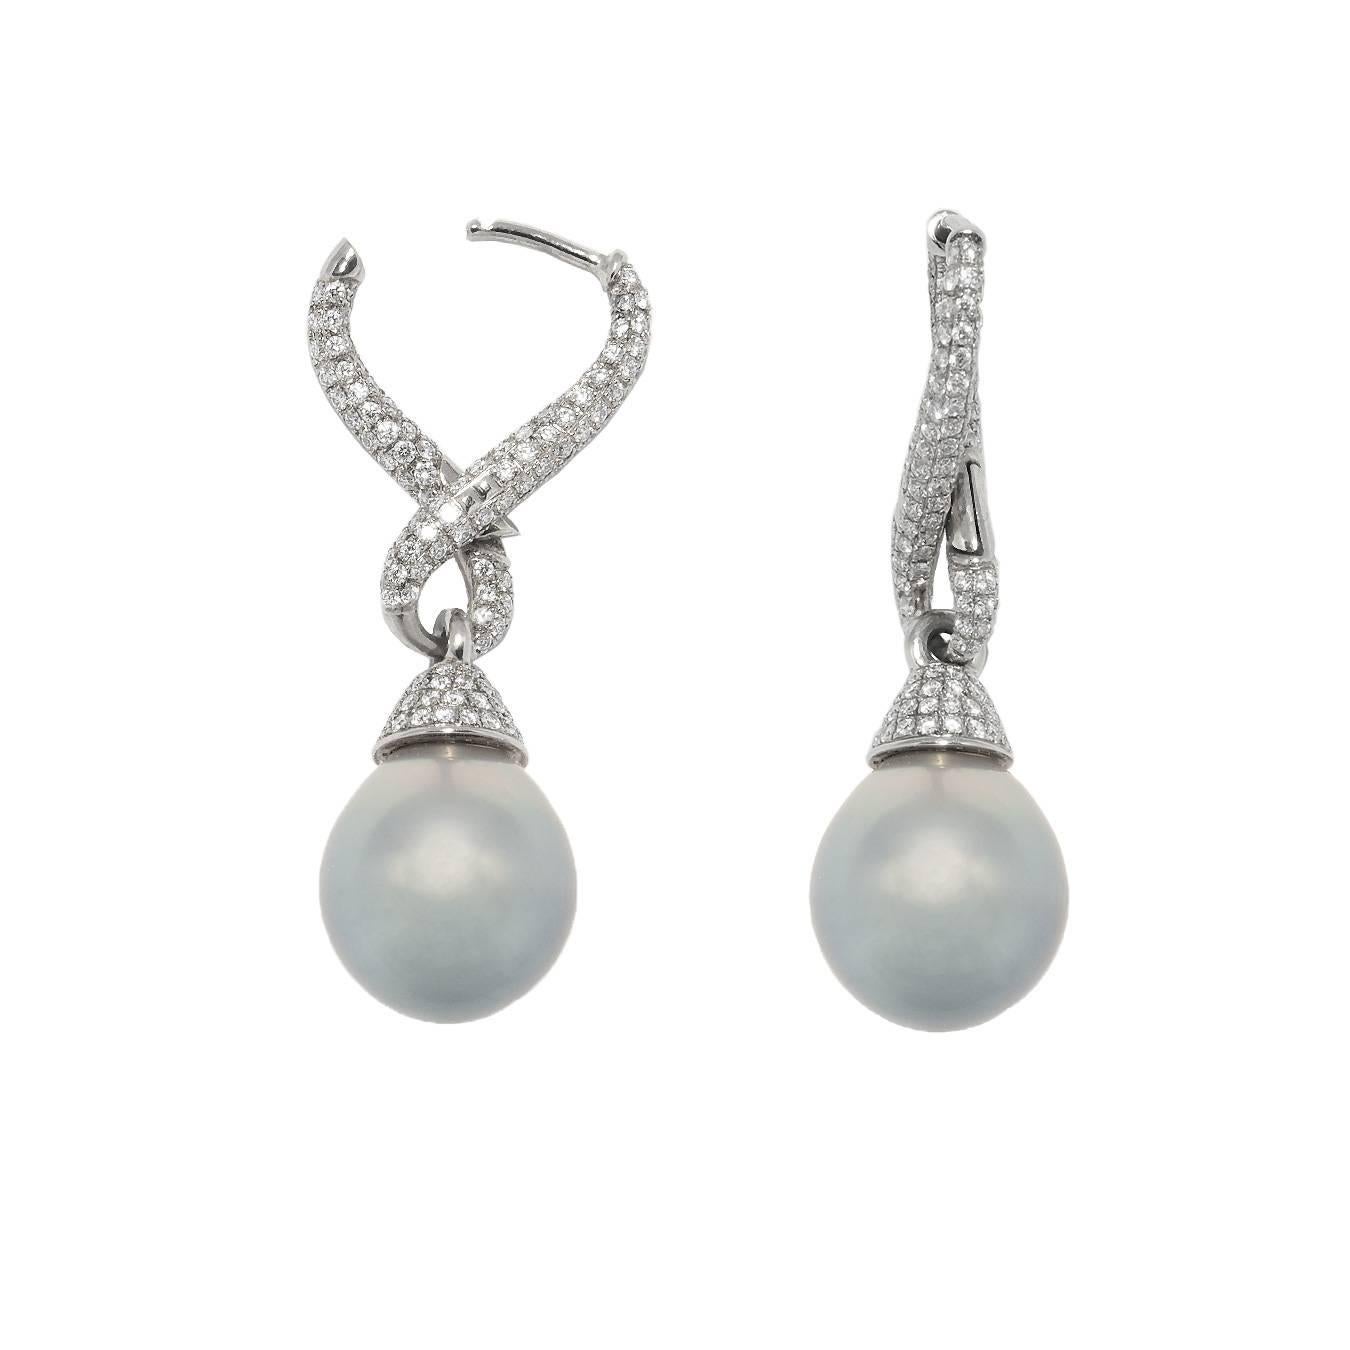 A classical and elegant pair of earrings with two tahitipearls in 18k white gold.
434 brilliant-cut diamonds 1.27 ct TW/SI adorn these beautiful earrings.
The pearl diameter is 11.3 mm.